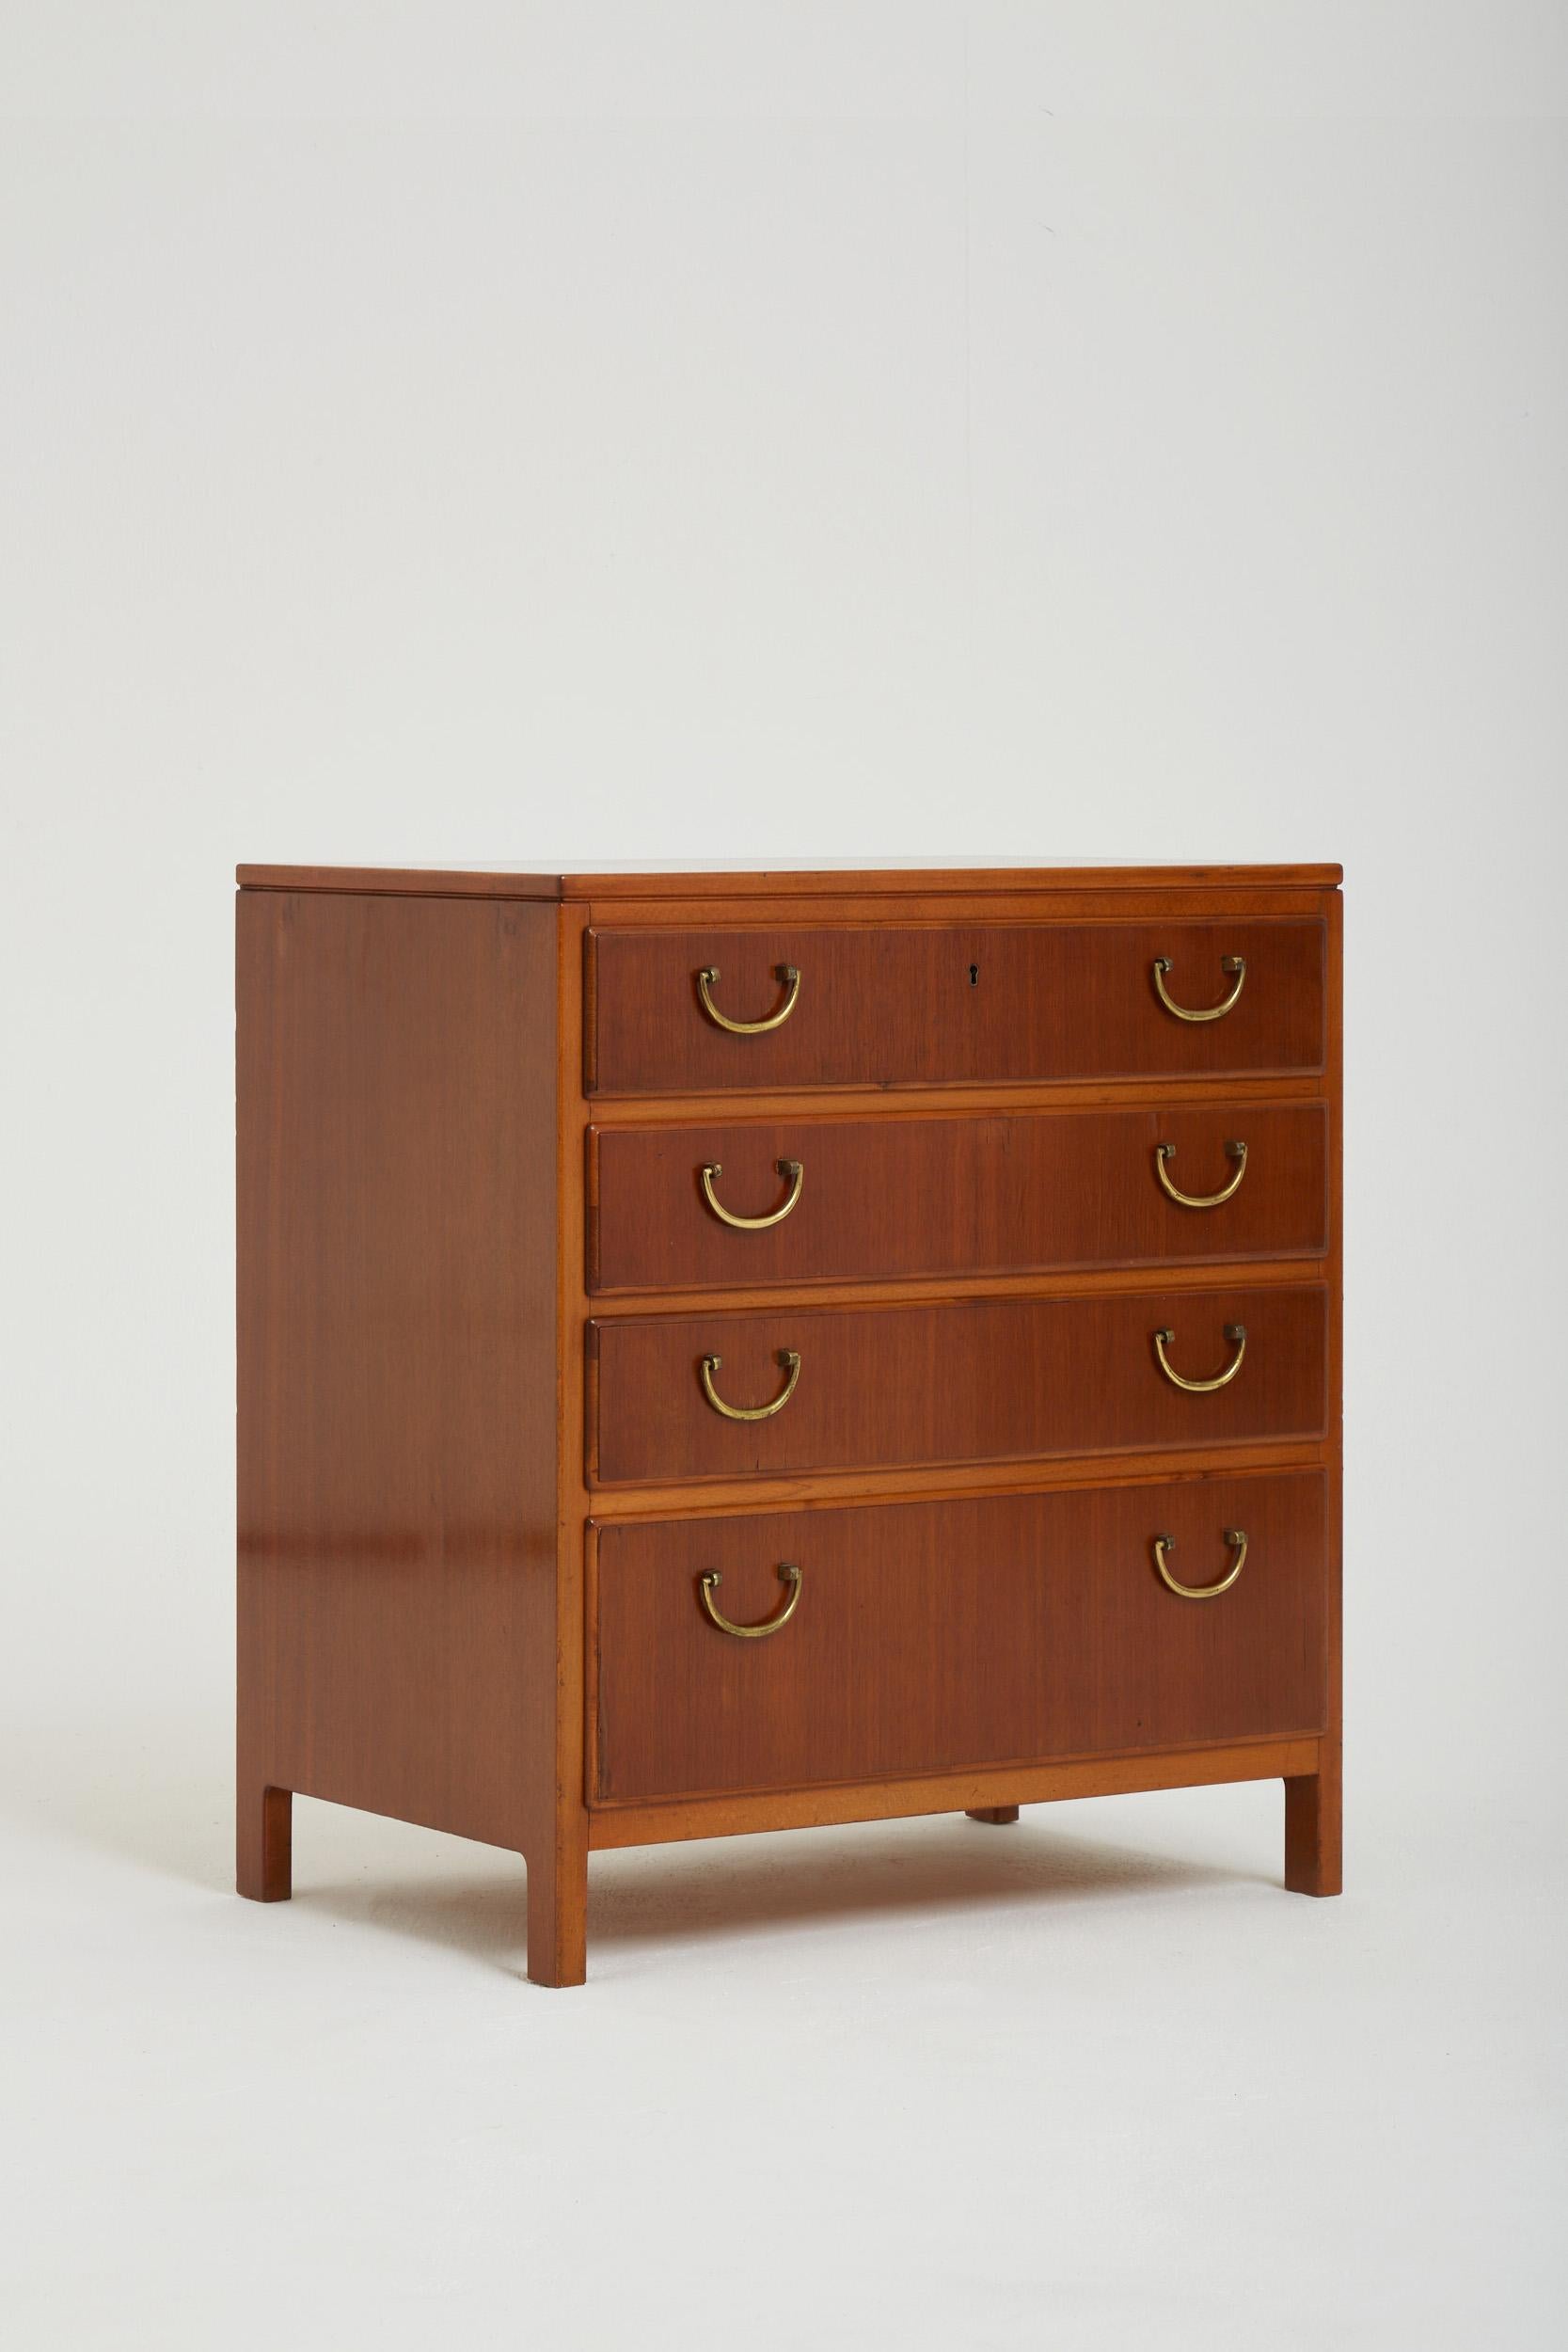 20th Century Pair of Bedside Chests of Drawers by David Rosen for Nordiska Kompaniet